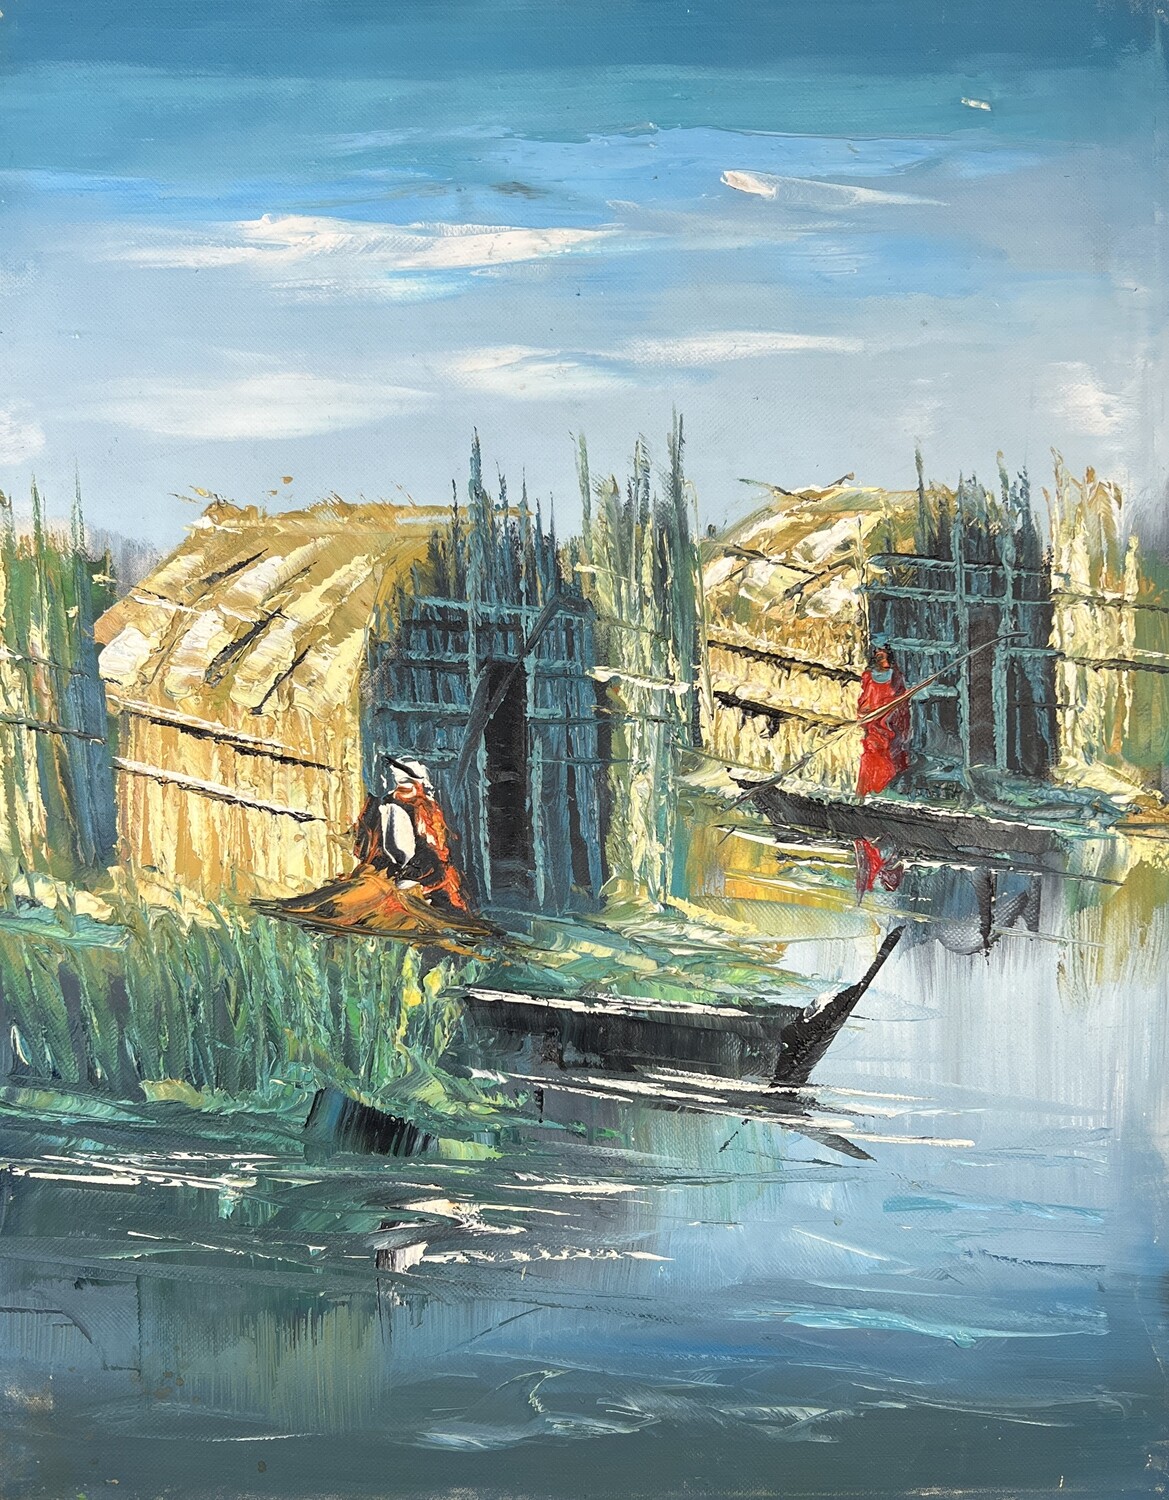 Boat and Hut - Knife Art Oil Painting